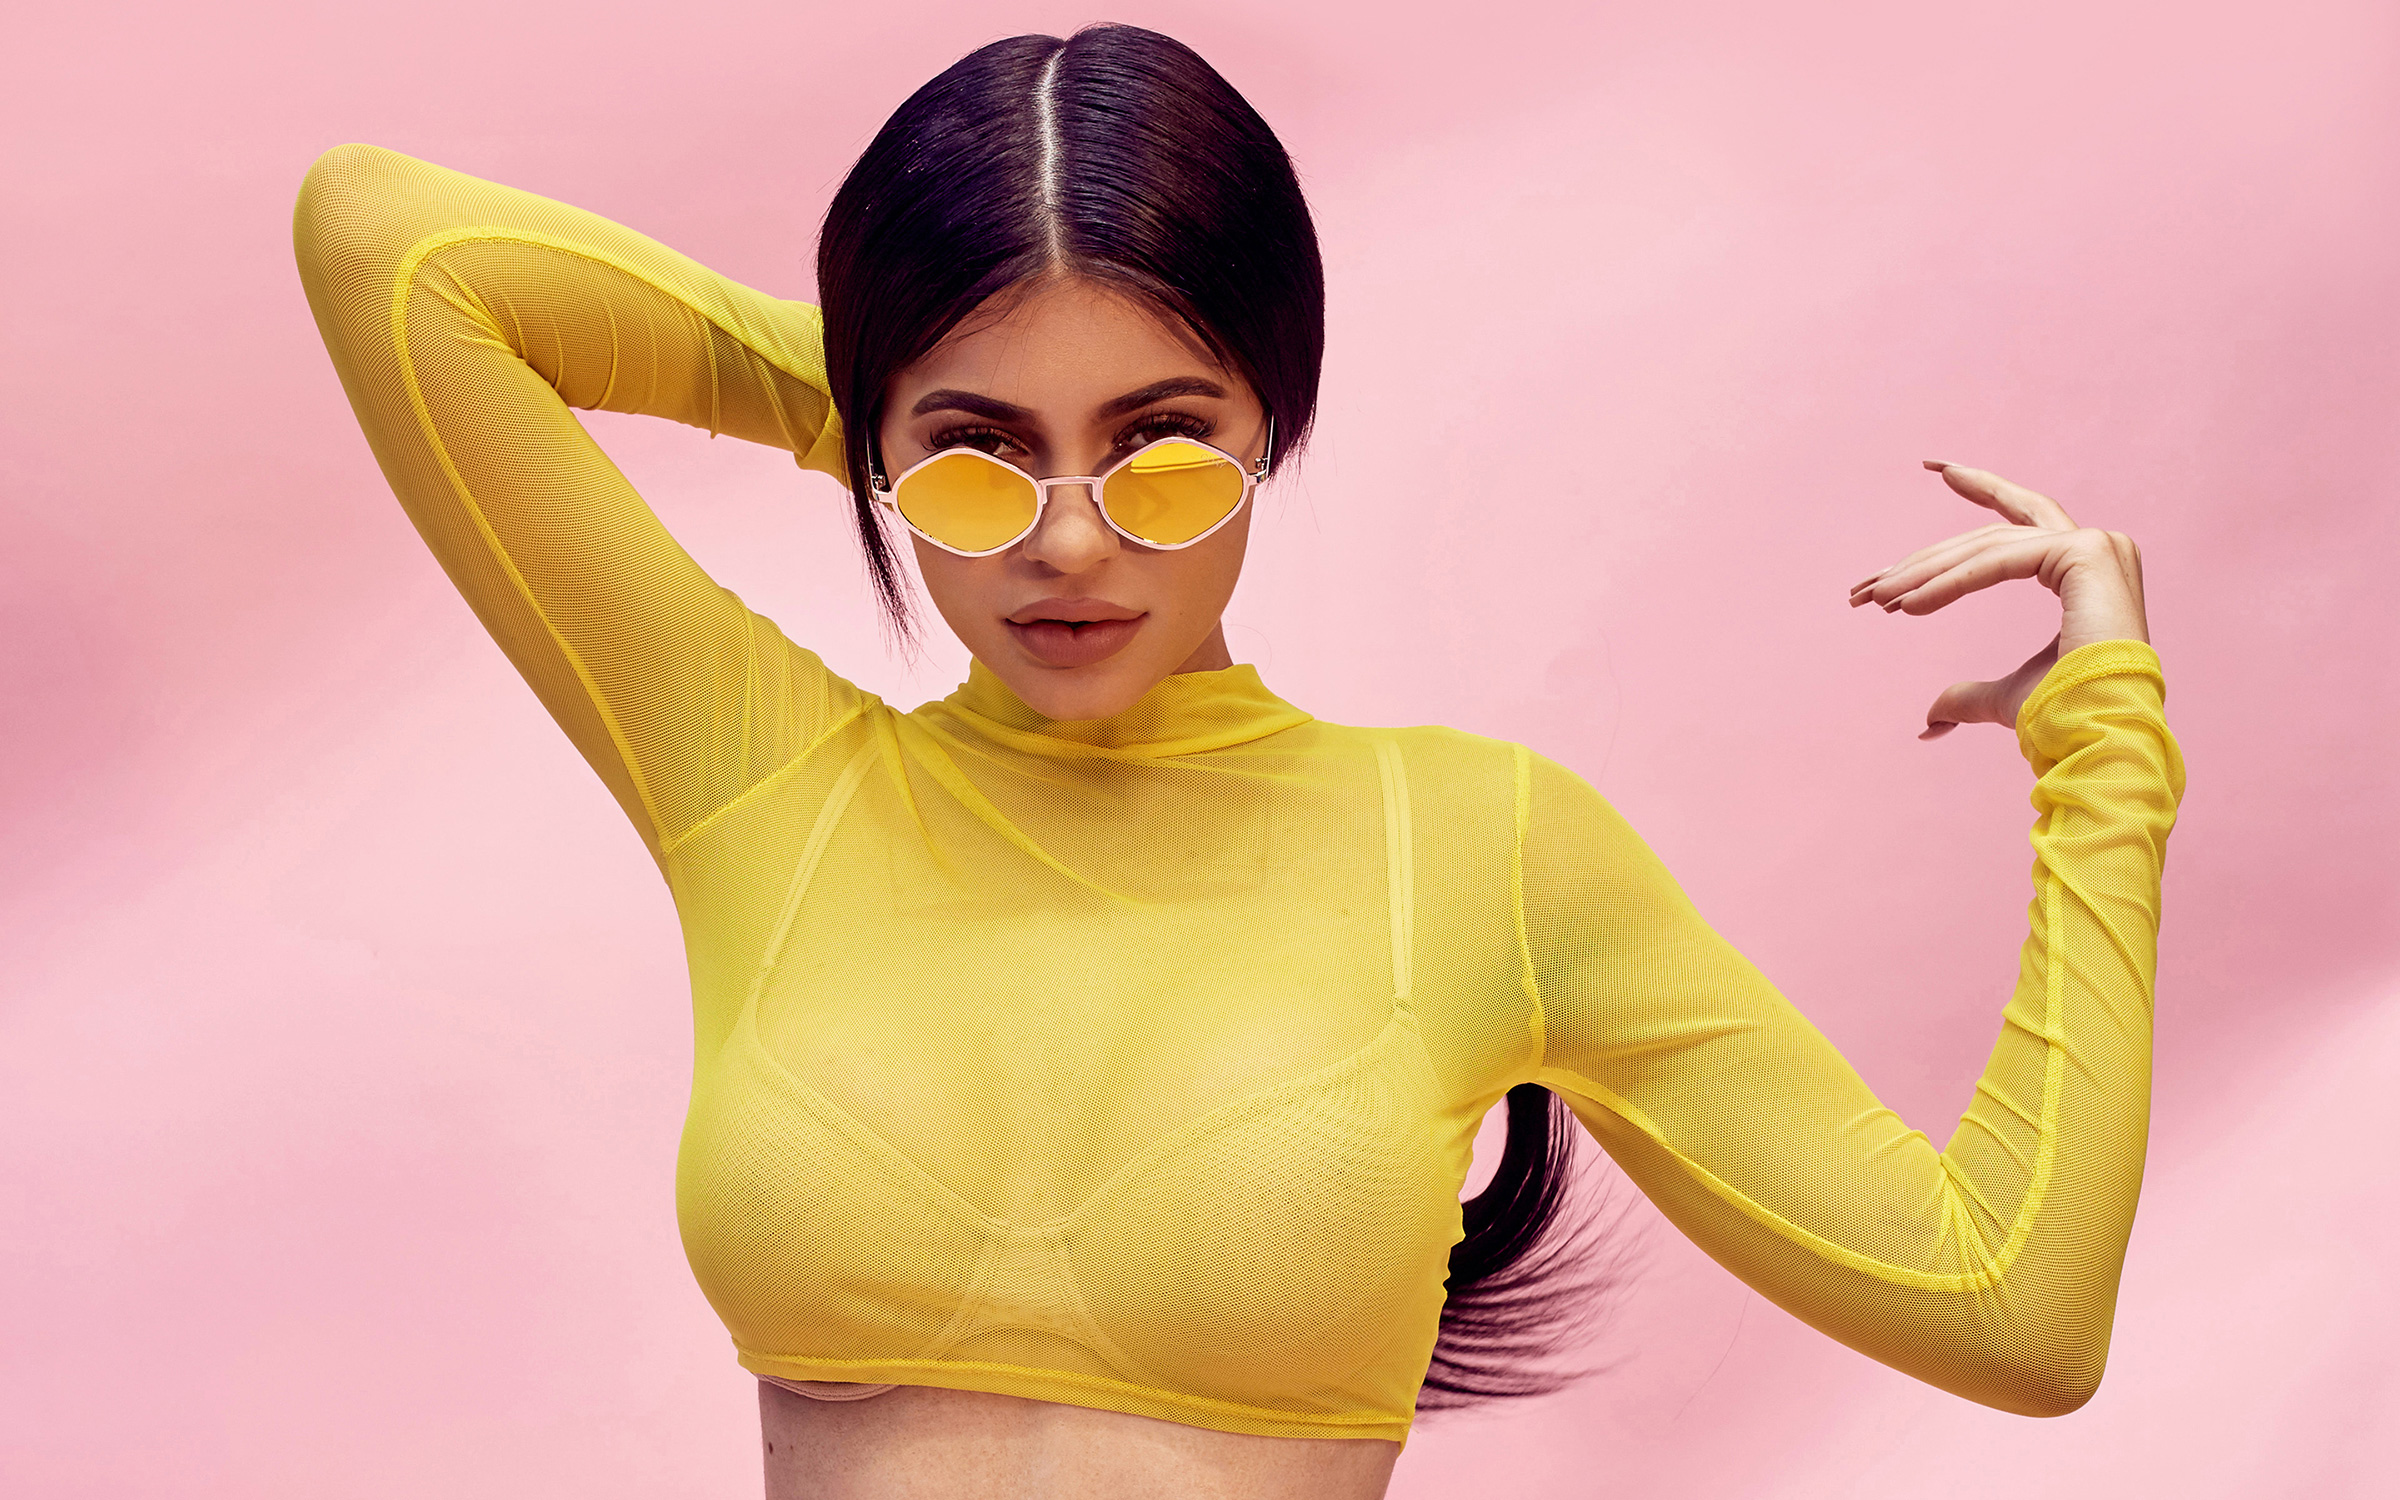 Kylie Jenner Wallpaper Download New 67 HD Image & Latest Pics